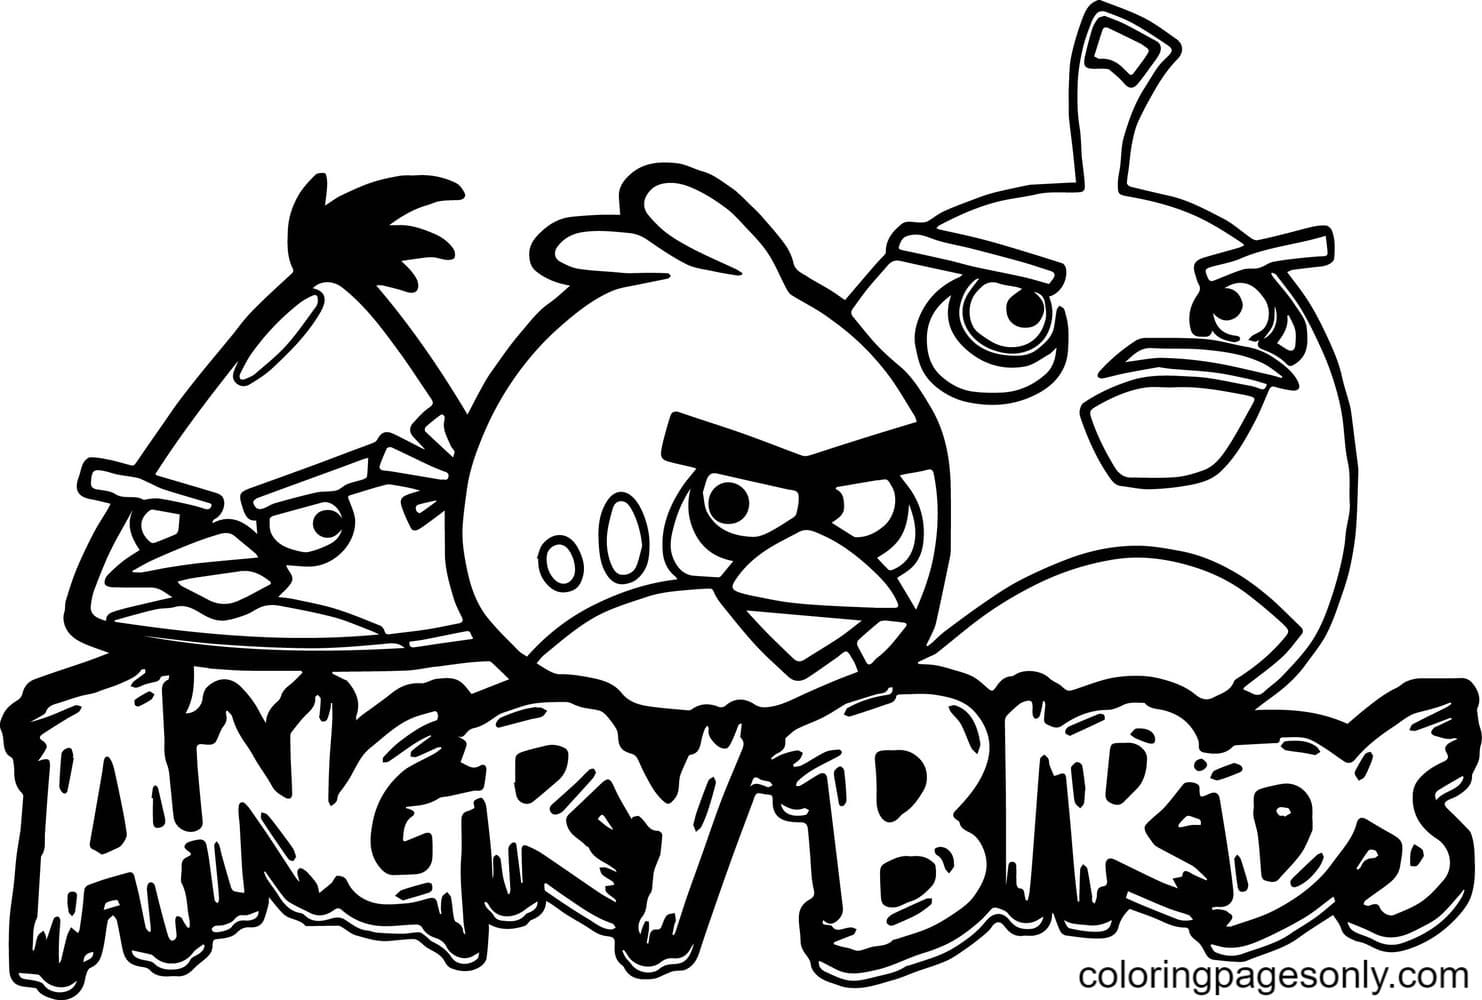 printable-angry-birds-coloring-page-free-printable-coloring-pages